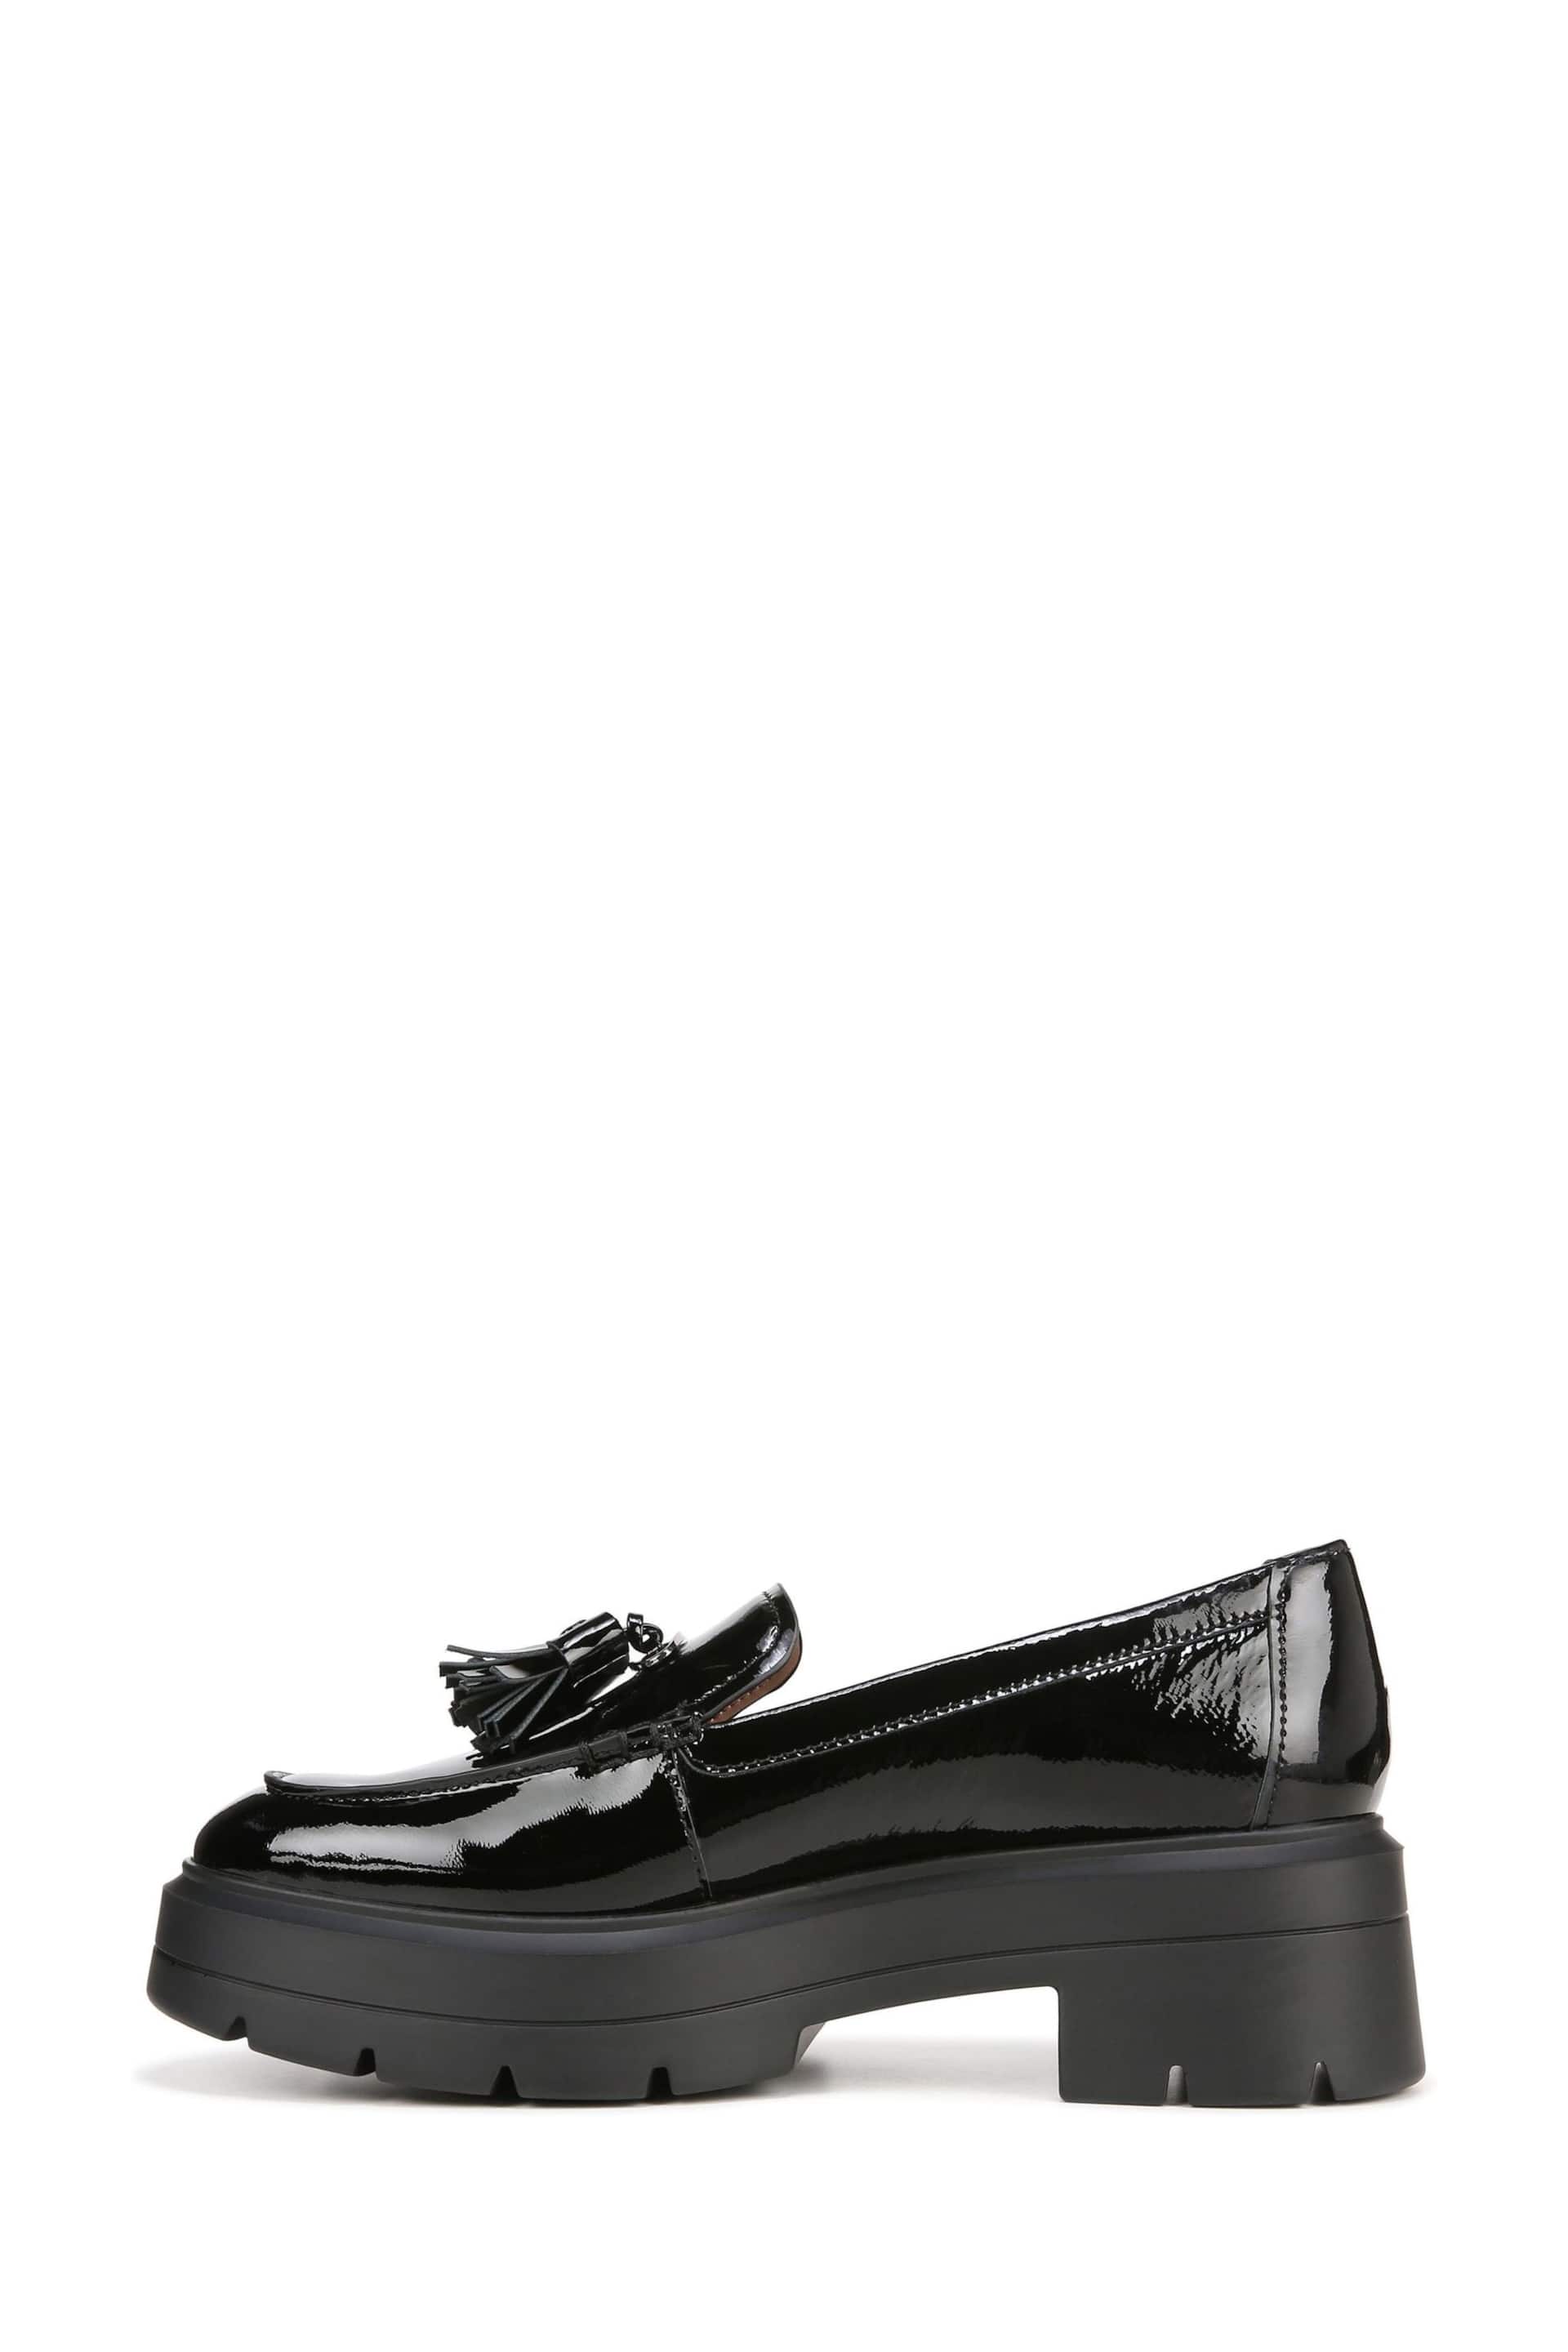 Naturalizer Nieves Slip-on Loafers - Image 2 of 7